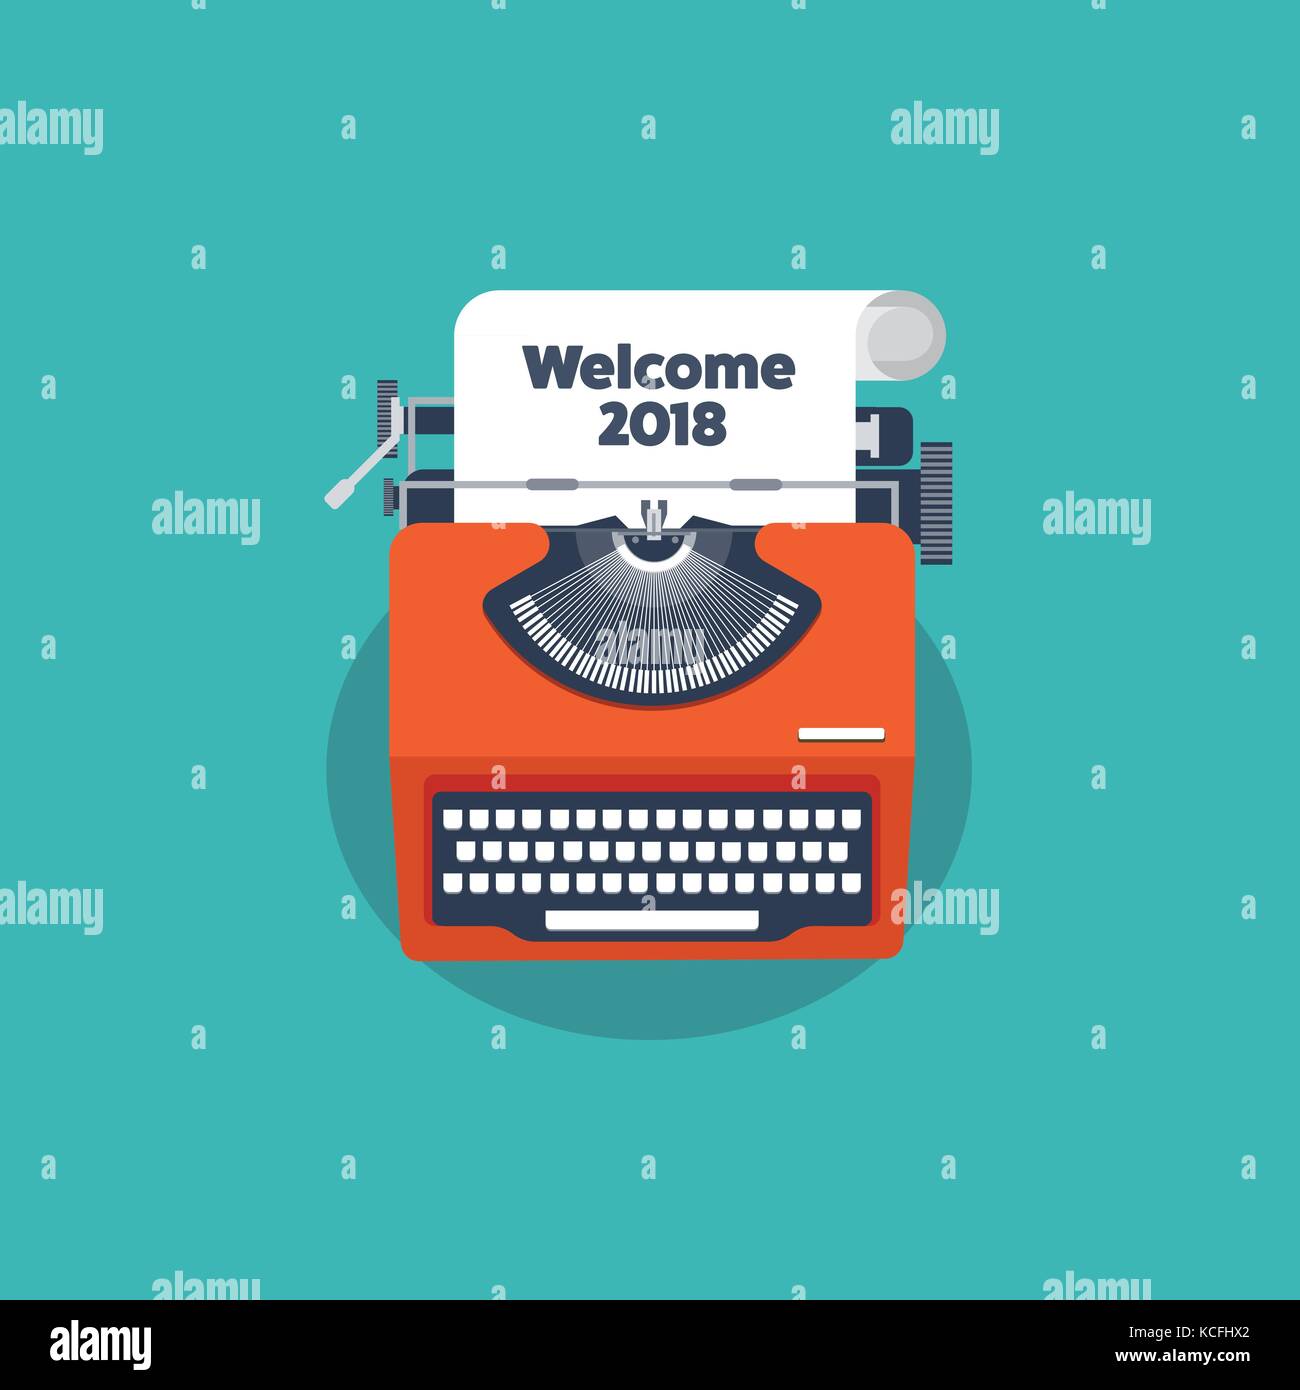 Typewriter in a flat style. Christmas wish list. Letter to Santa. New year. 2018. December holidays. Stock Vector